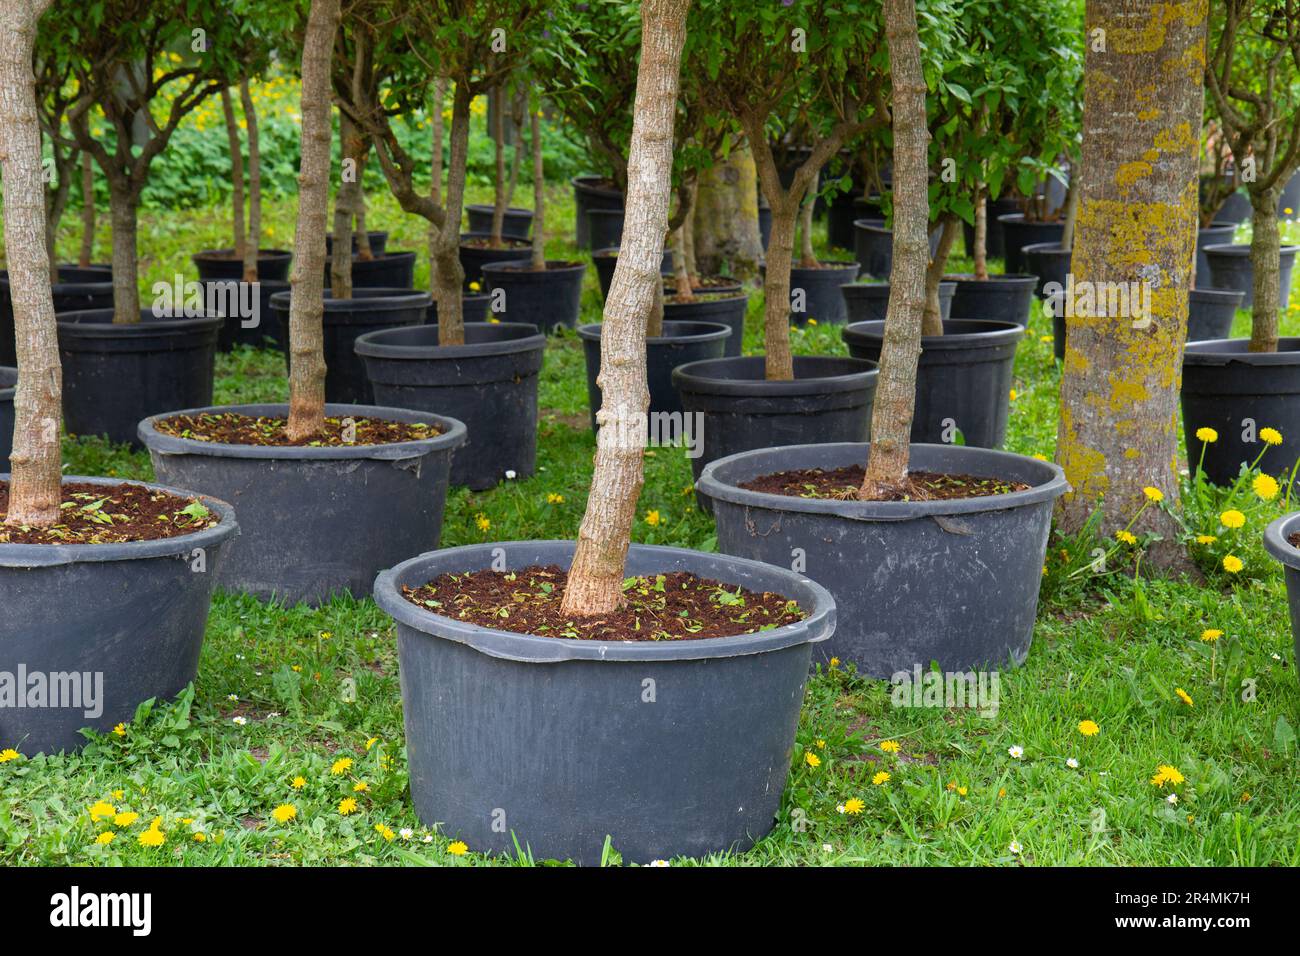 Nursery of fruit and berry trees and bushes for planting on a garden plot in the garden Stock Photo